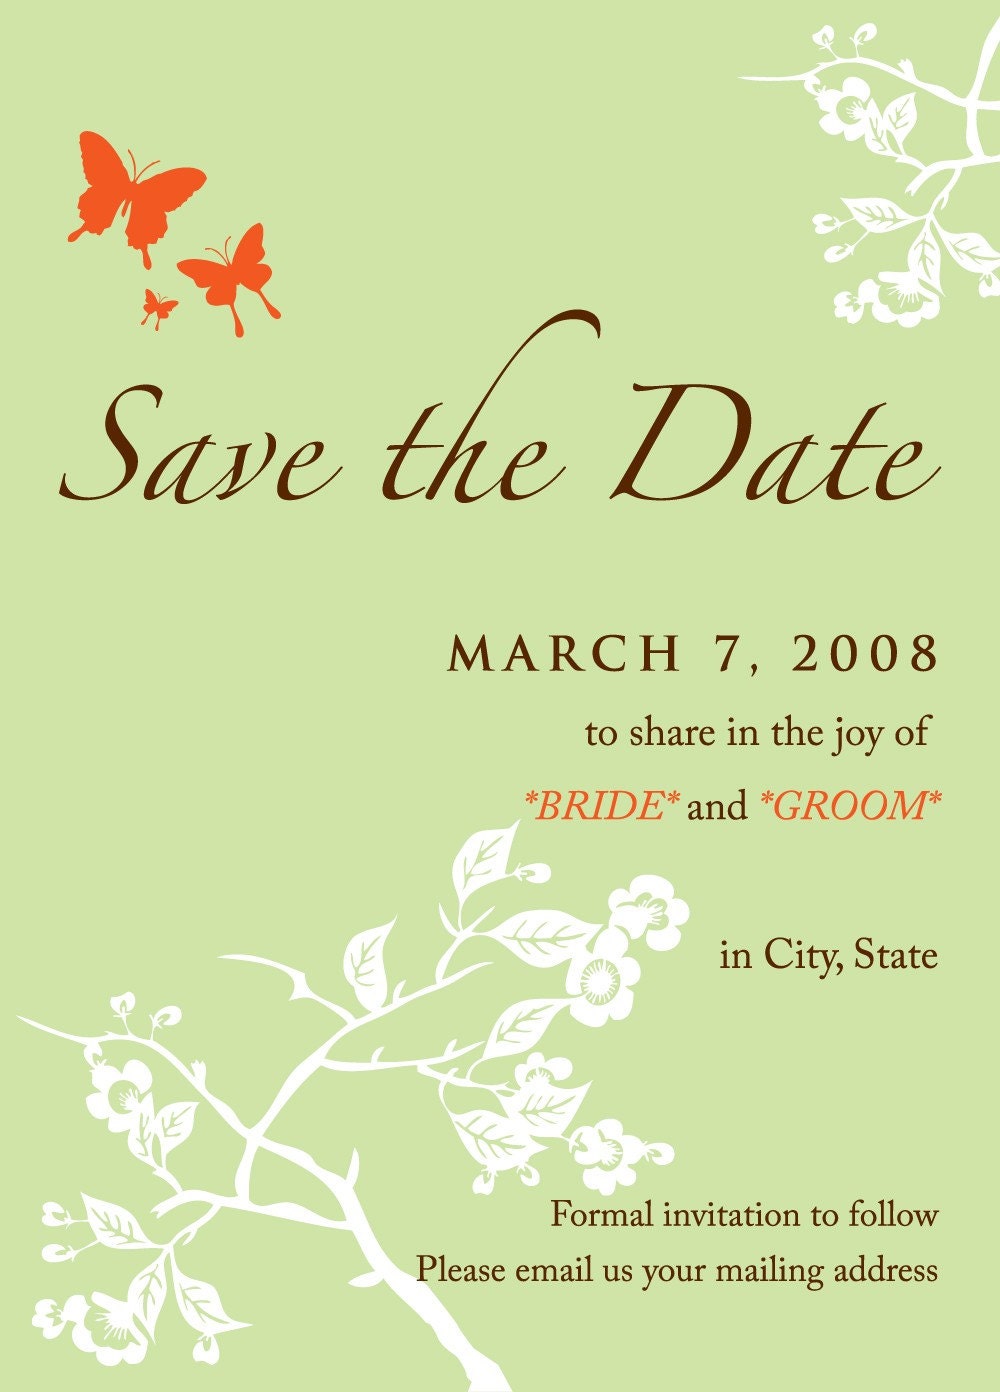 SAVE THE DATE via email for a GREENER wedding - Kayla